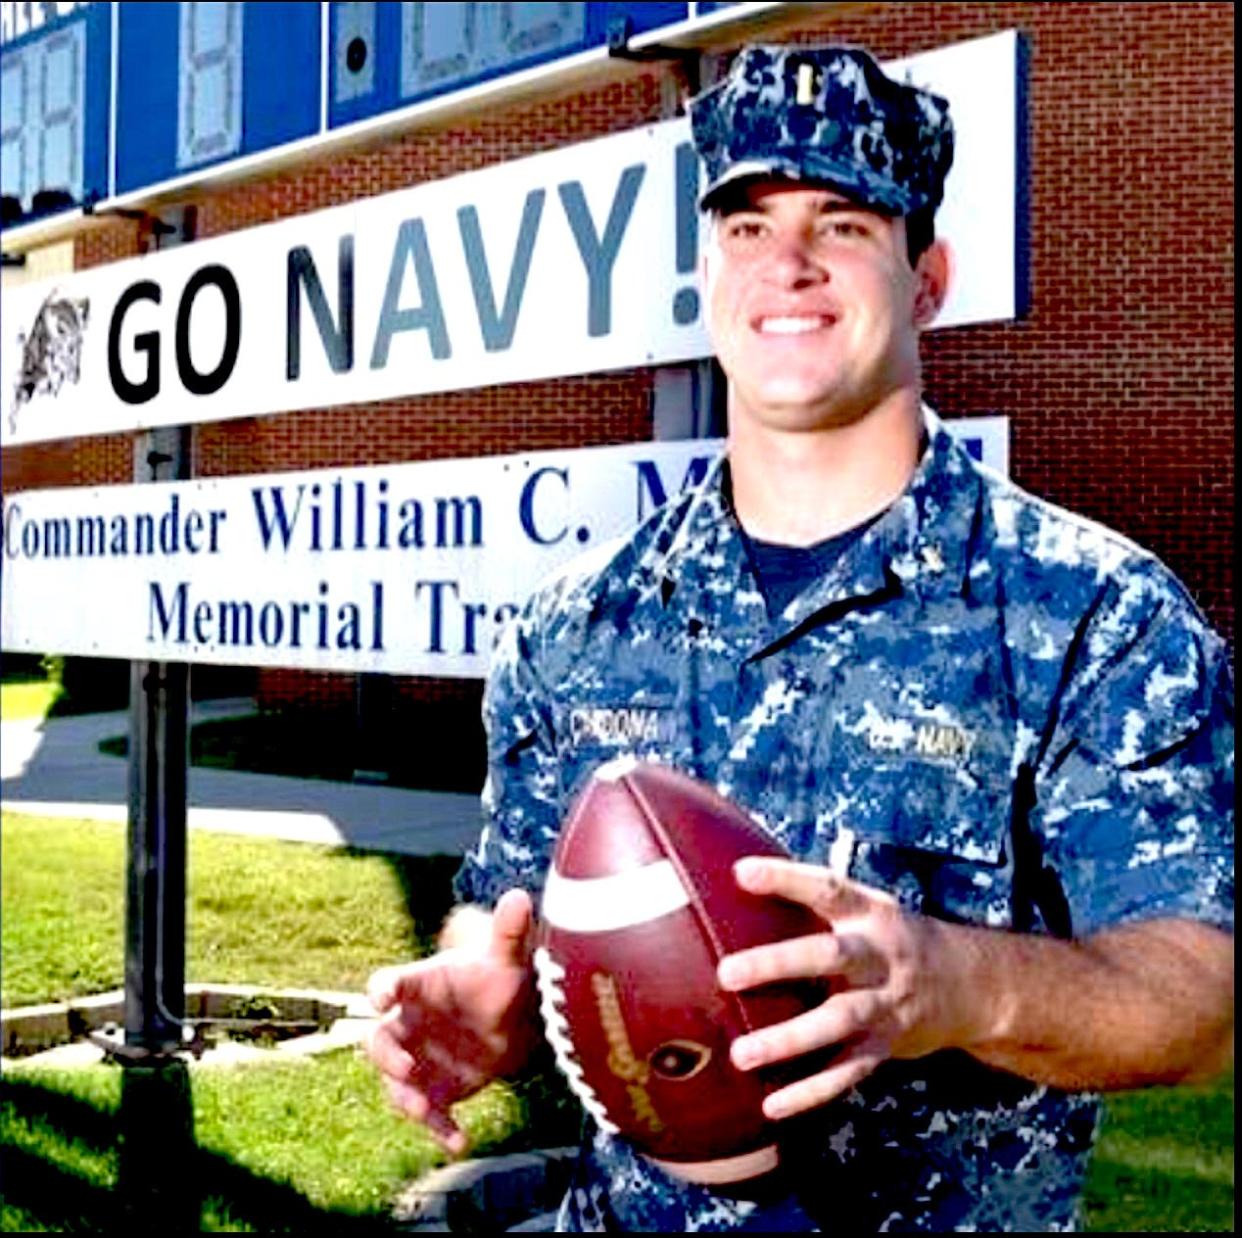 Then-Ensign Joe Cardona stands in front of the sign dedicating the track at the Naval Academy Preparatory School in Newport in 2015.